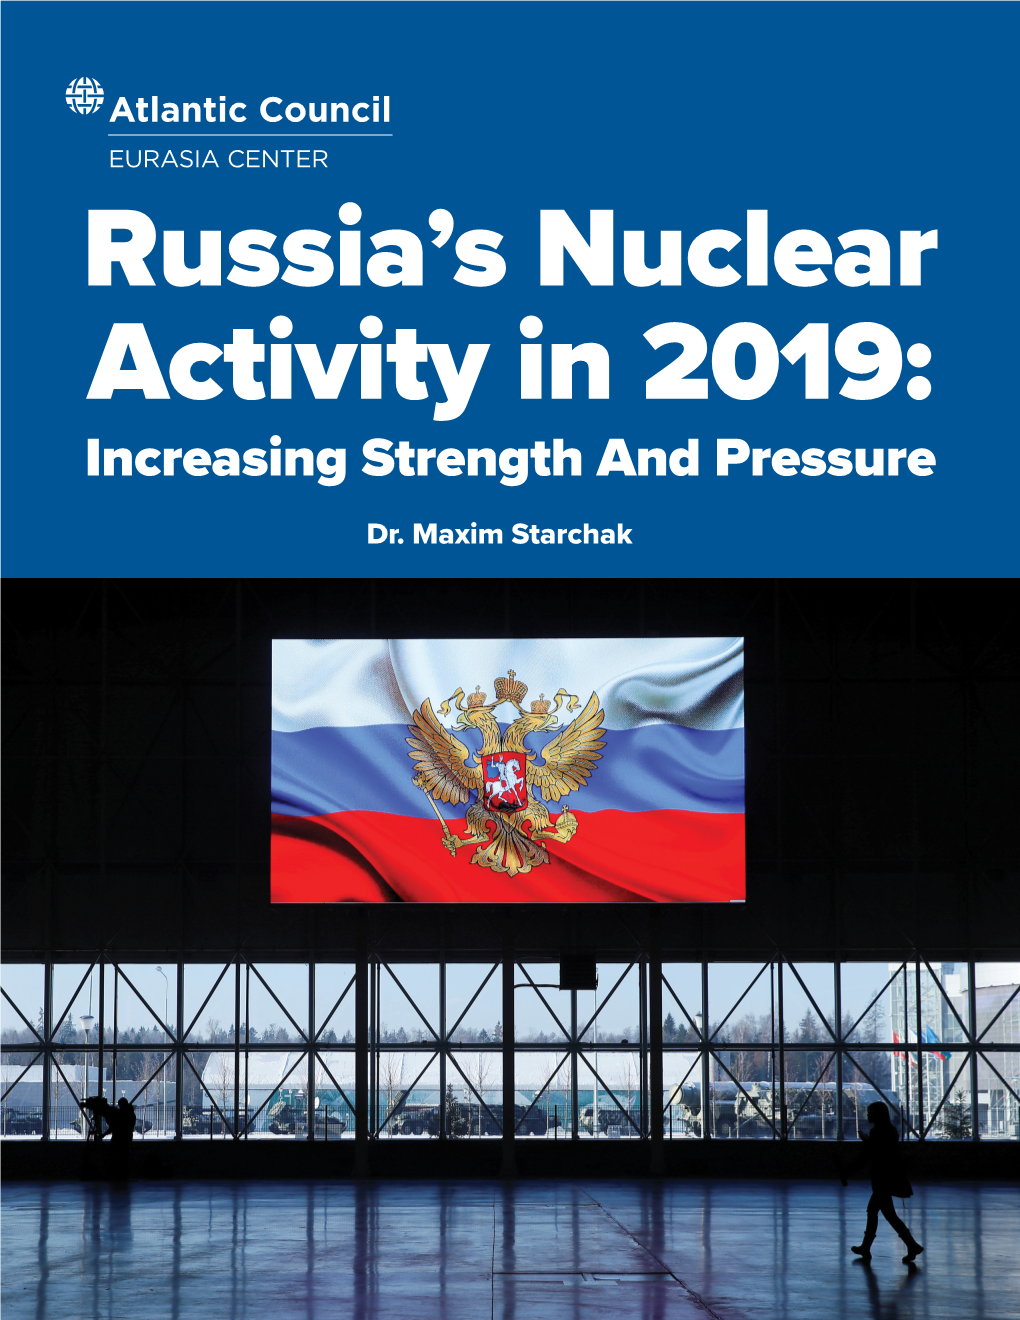 Russia's Nuclear Activity in 2019: Increasing Strength and Pressure